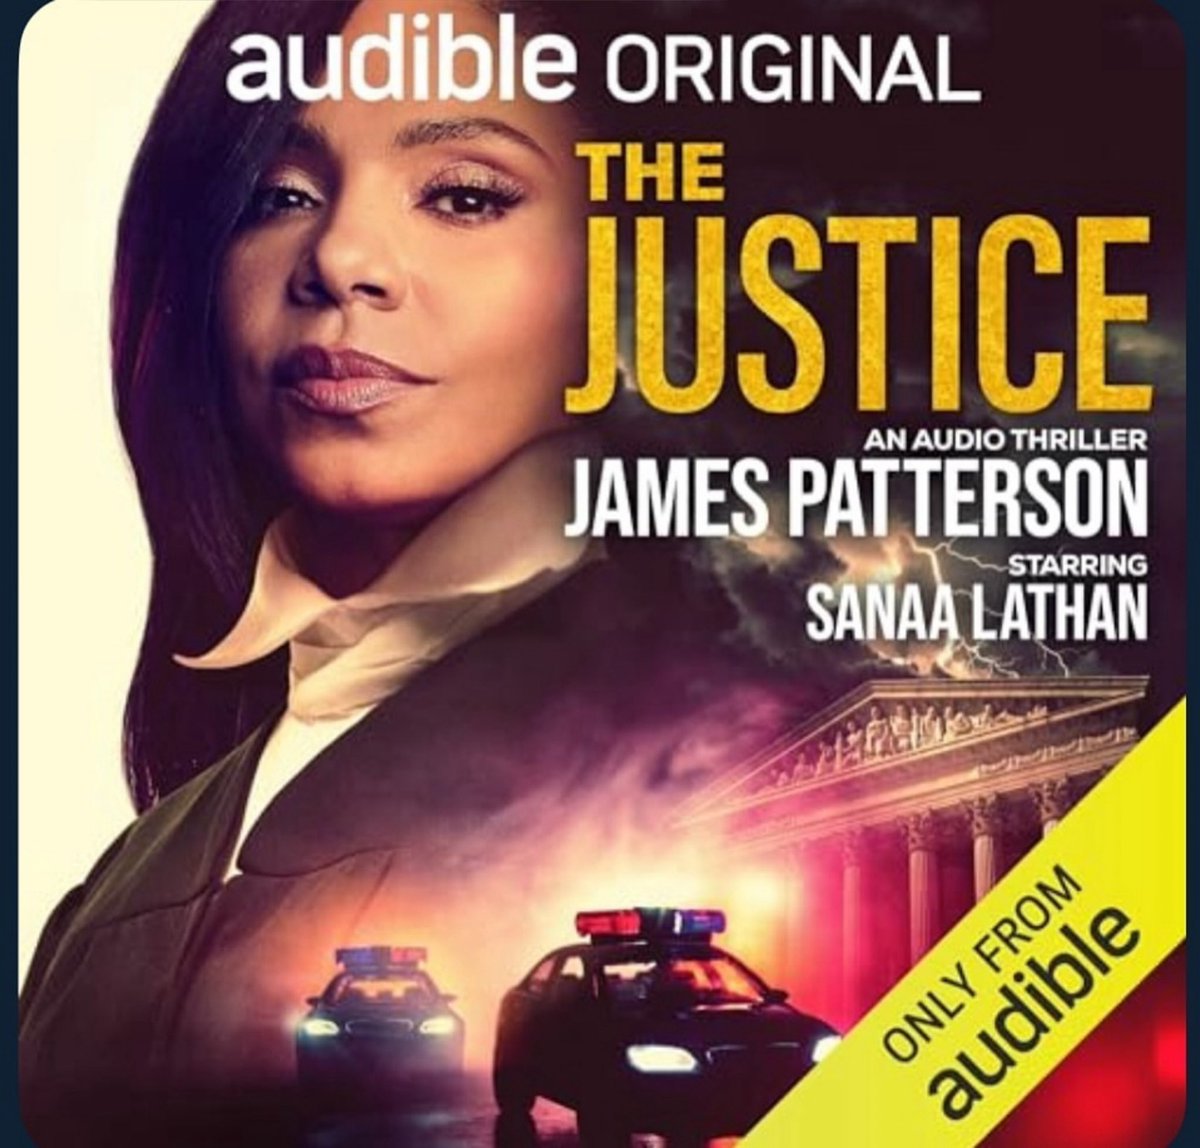 For those of you who like to listen to your books, check me out starring in the CAPTIVATING audio thriller of James Patterson’s The Justice. Only on @audible #JamesPatterson #thejustice 🔥